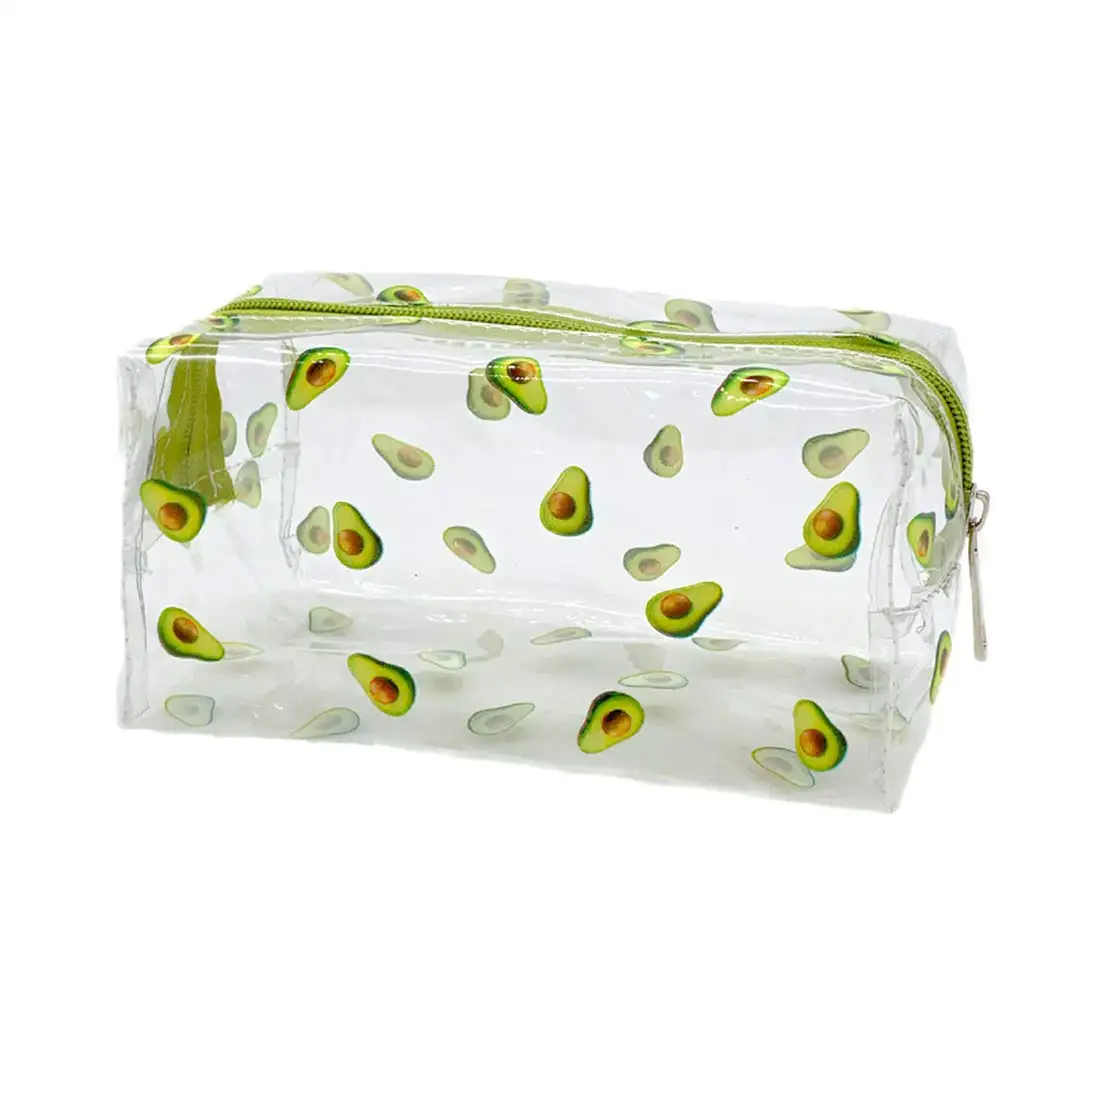 Premium Quality Clear Toiletry Zippered Clear PVC Cosmetic Bag